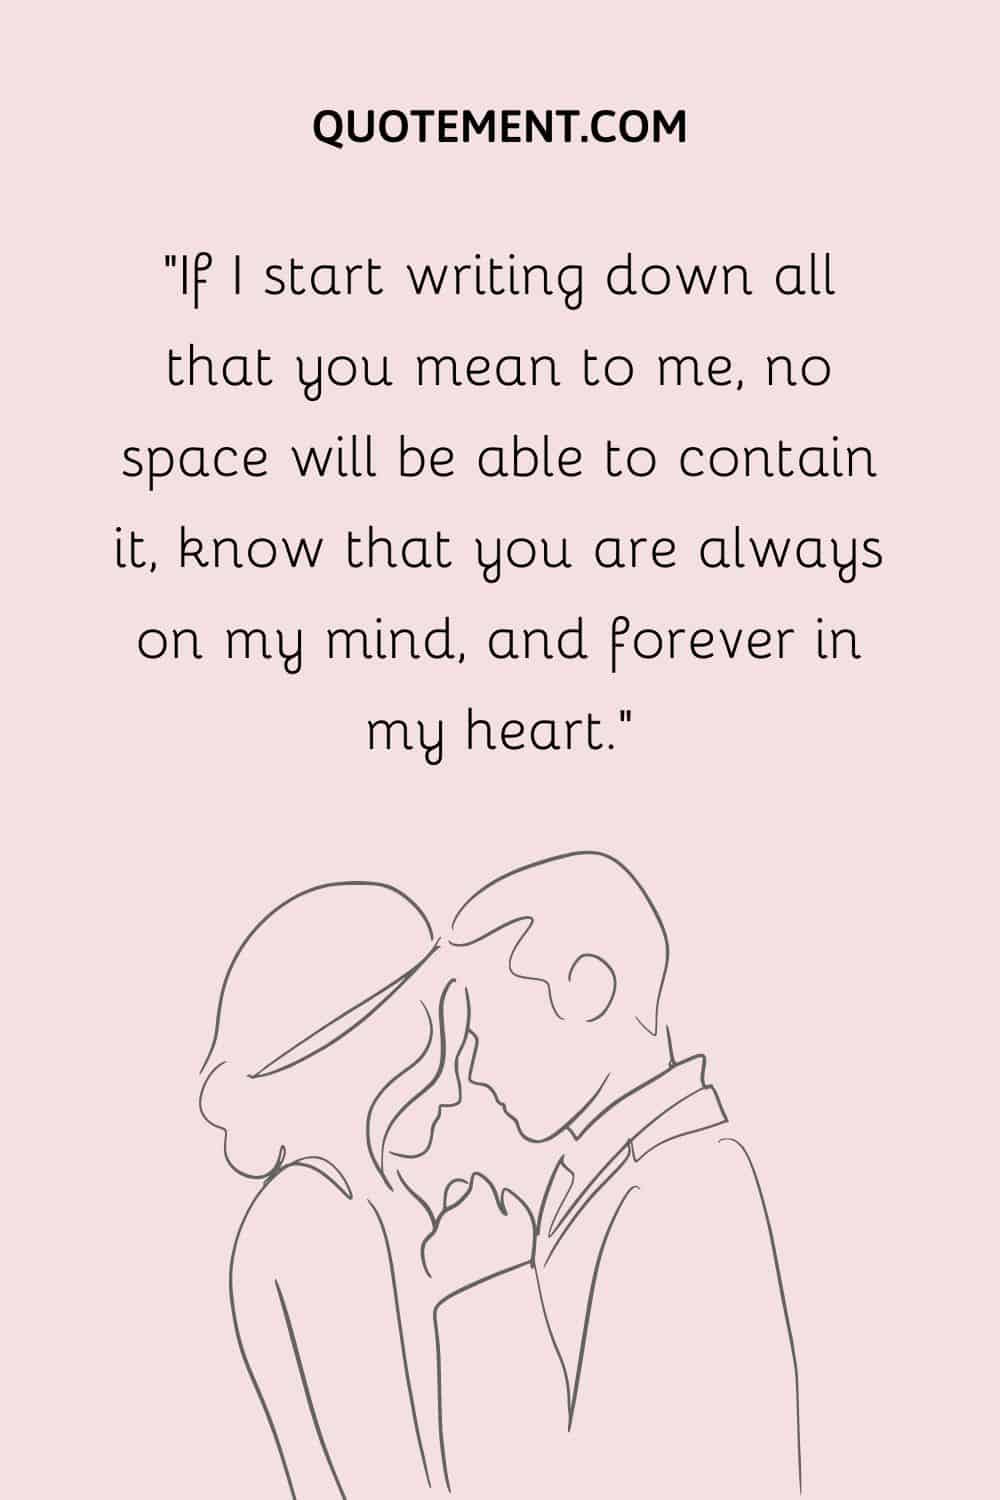 If I start writing down all that you mean to me, no space will be able to contain it